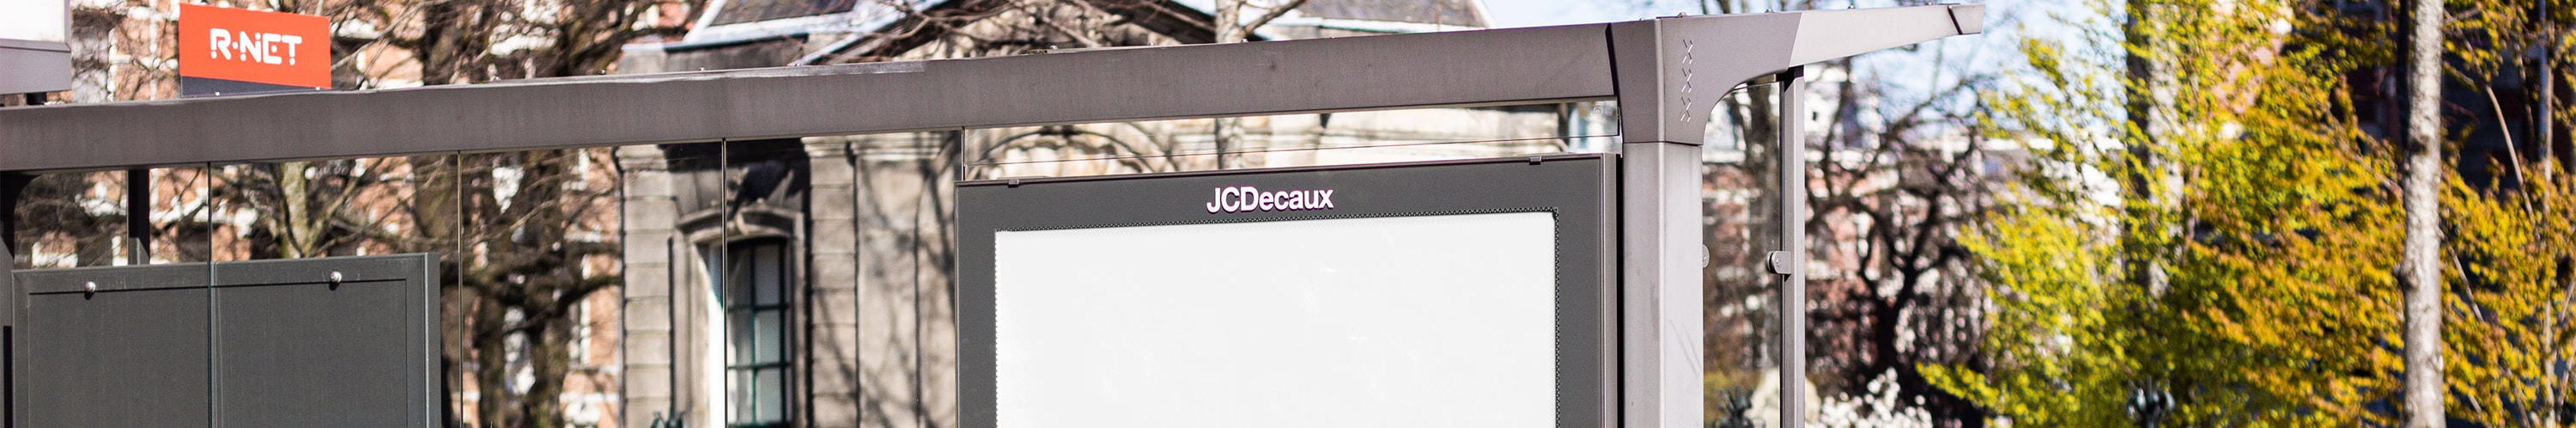 JCDecaux’s Out-of-Home advertising solutions make +850 Mn people worldwide more market-aware daily